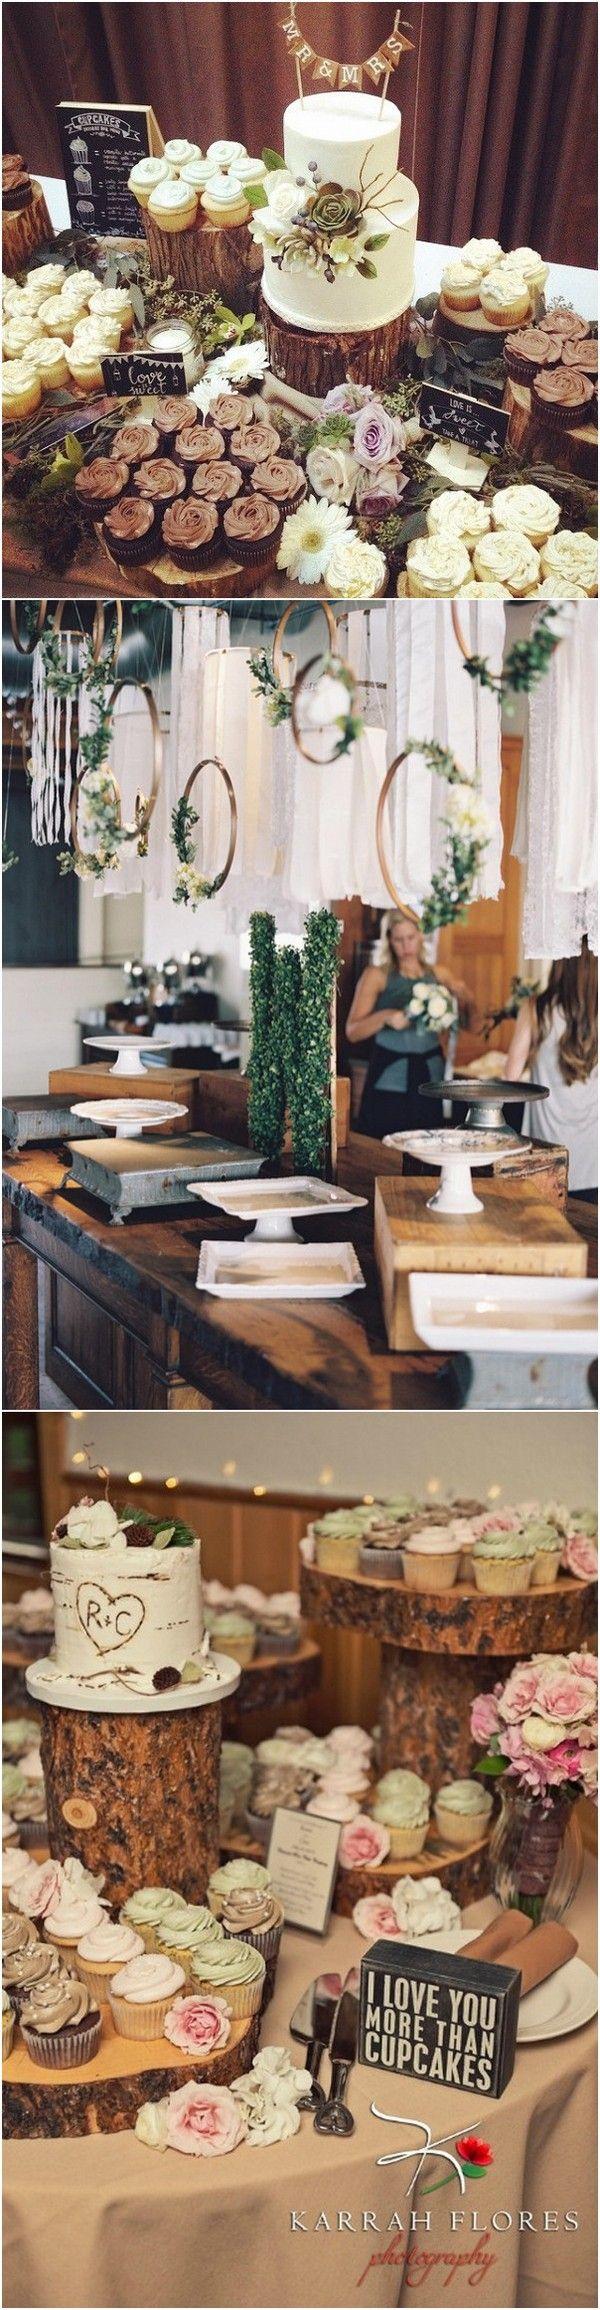 Wedding - 16 Country Rustic Wedding Dessert Table Ideas - Page 2 Of 4